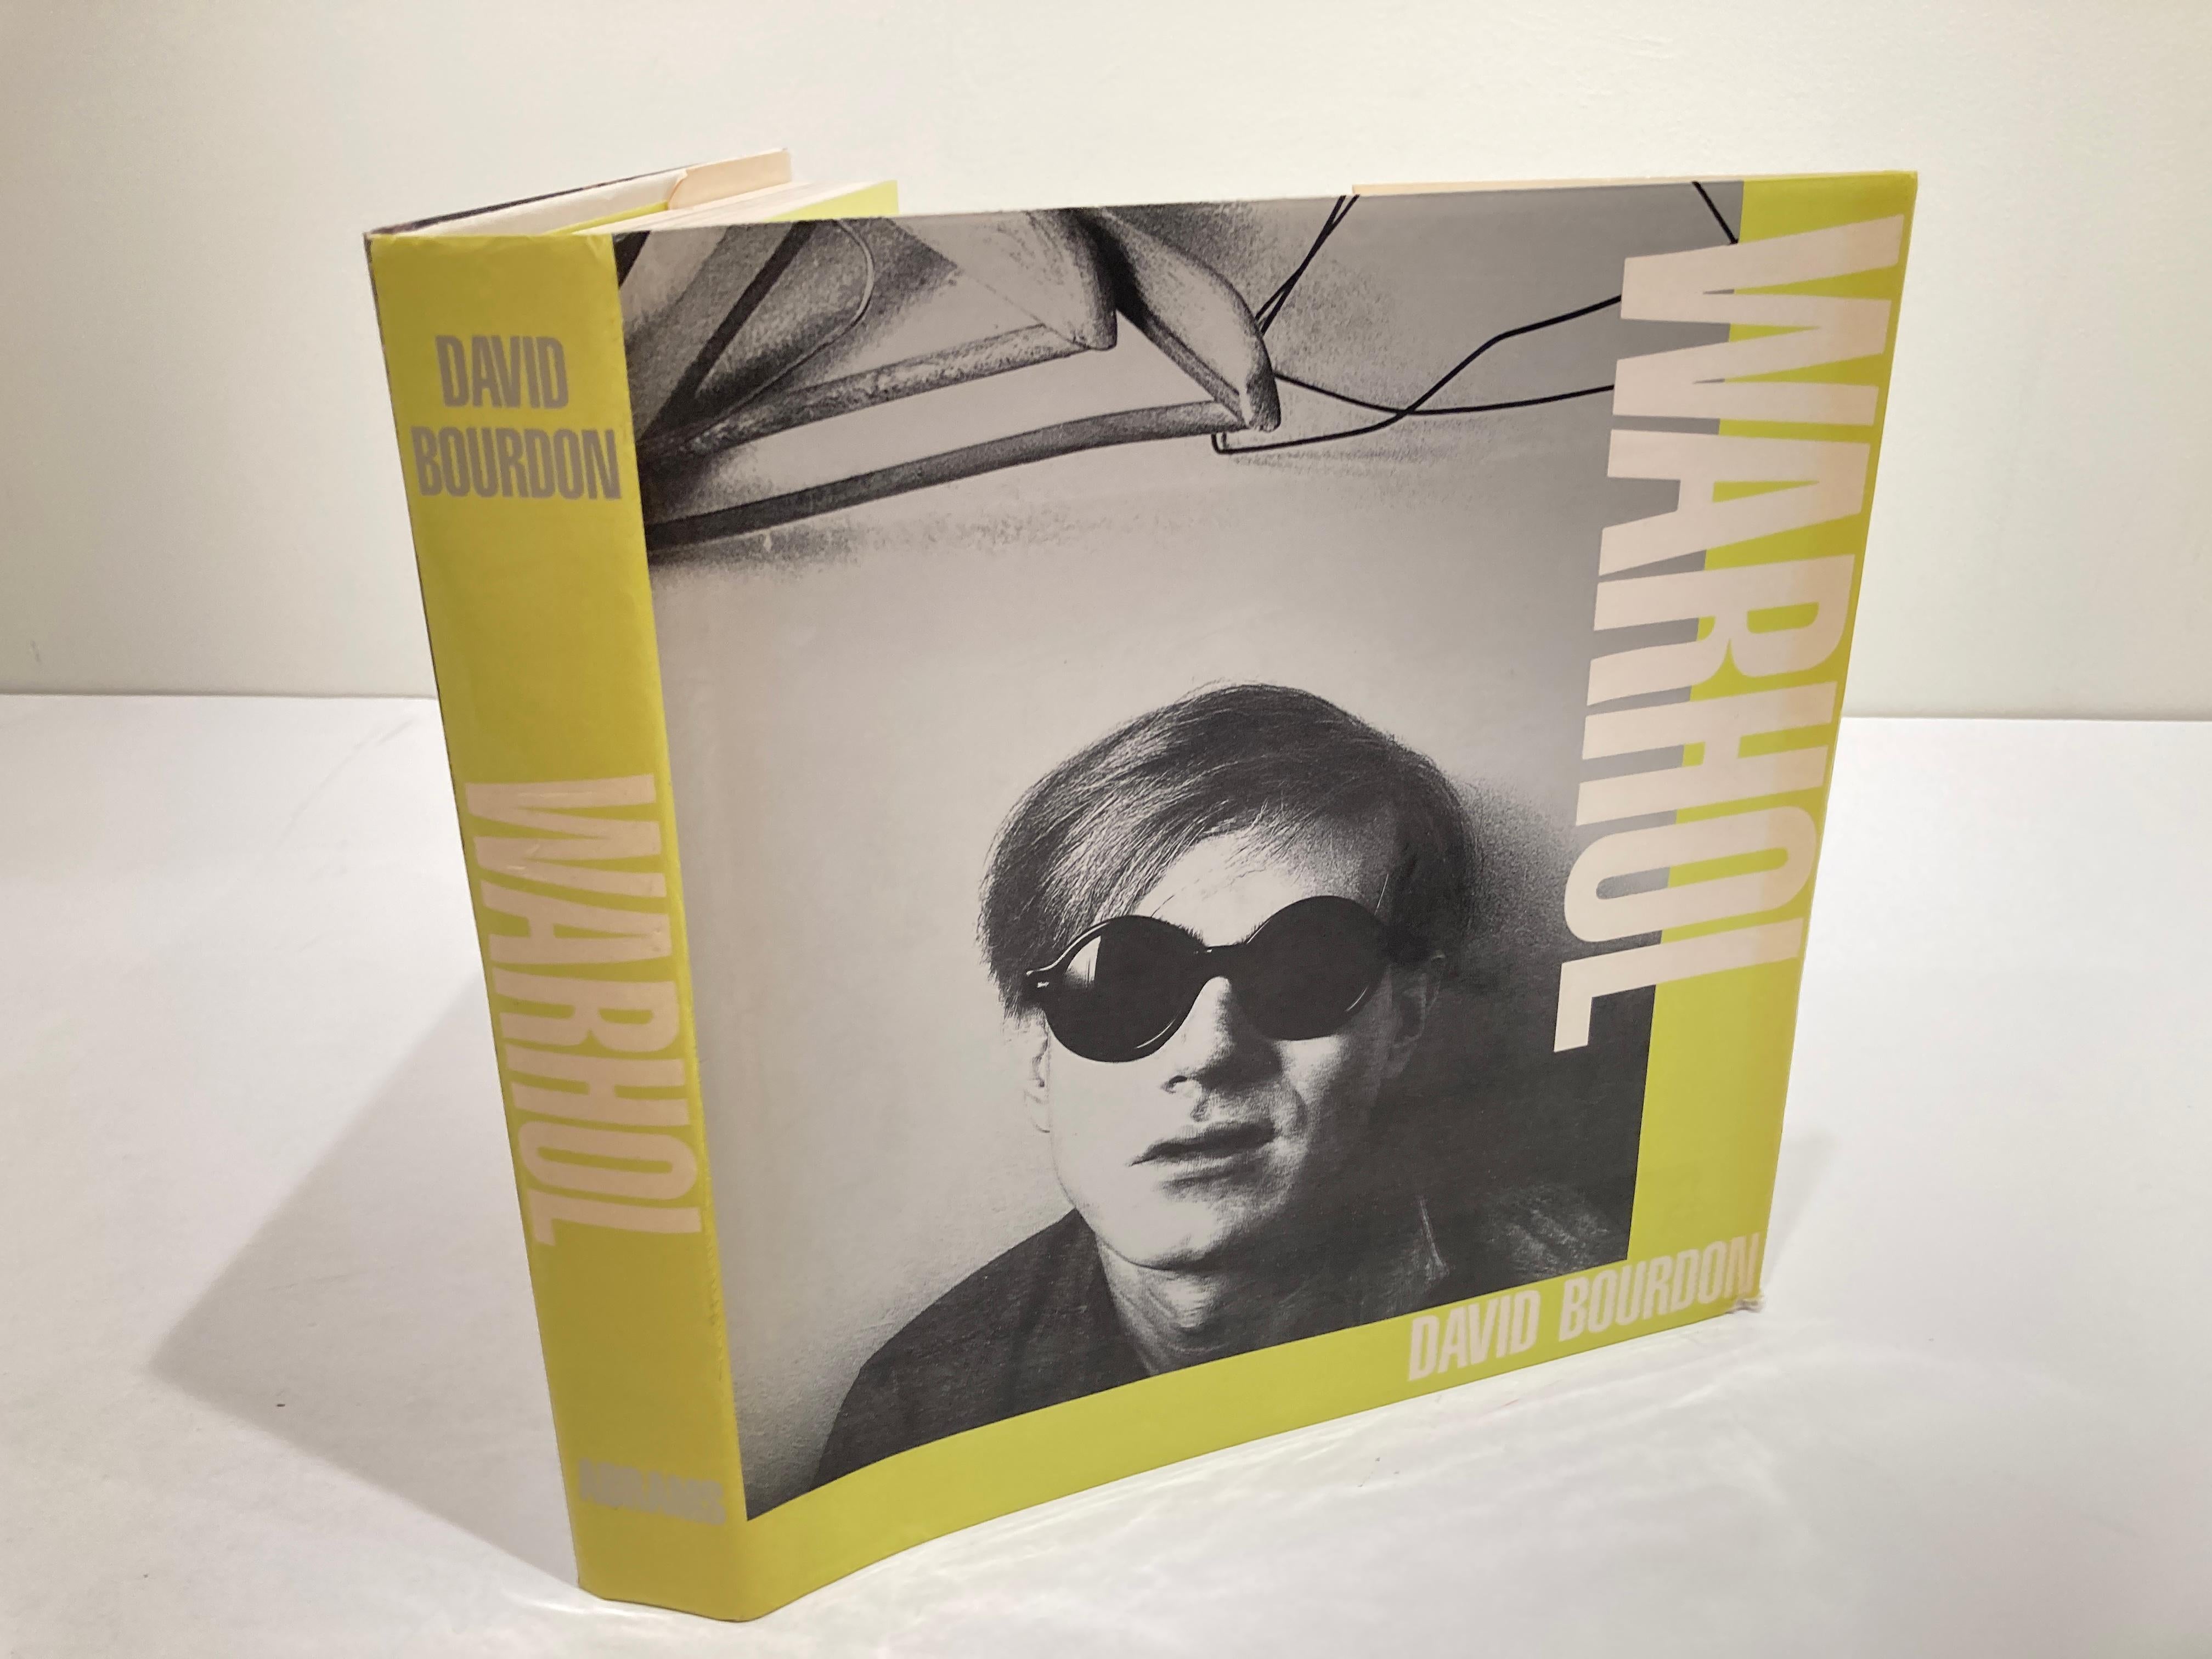 American Andy Warhol by David Bourdon Collectible Poster Art Book Vintage, 1989 For Sale